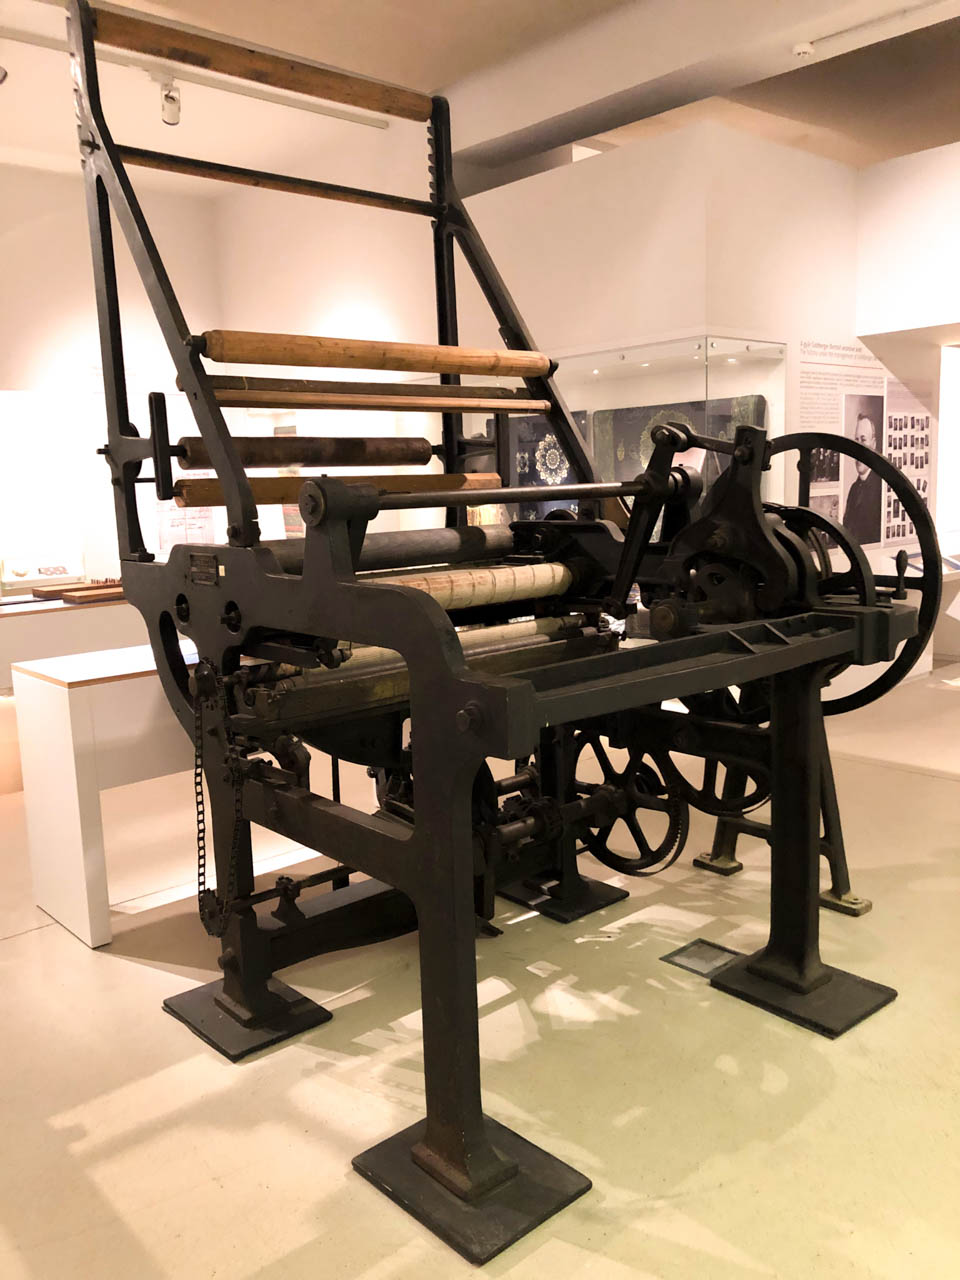 Mangle on display at the Goldberger Textile Museum in Budapest